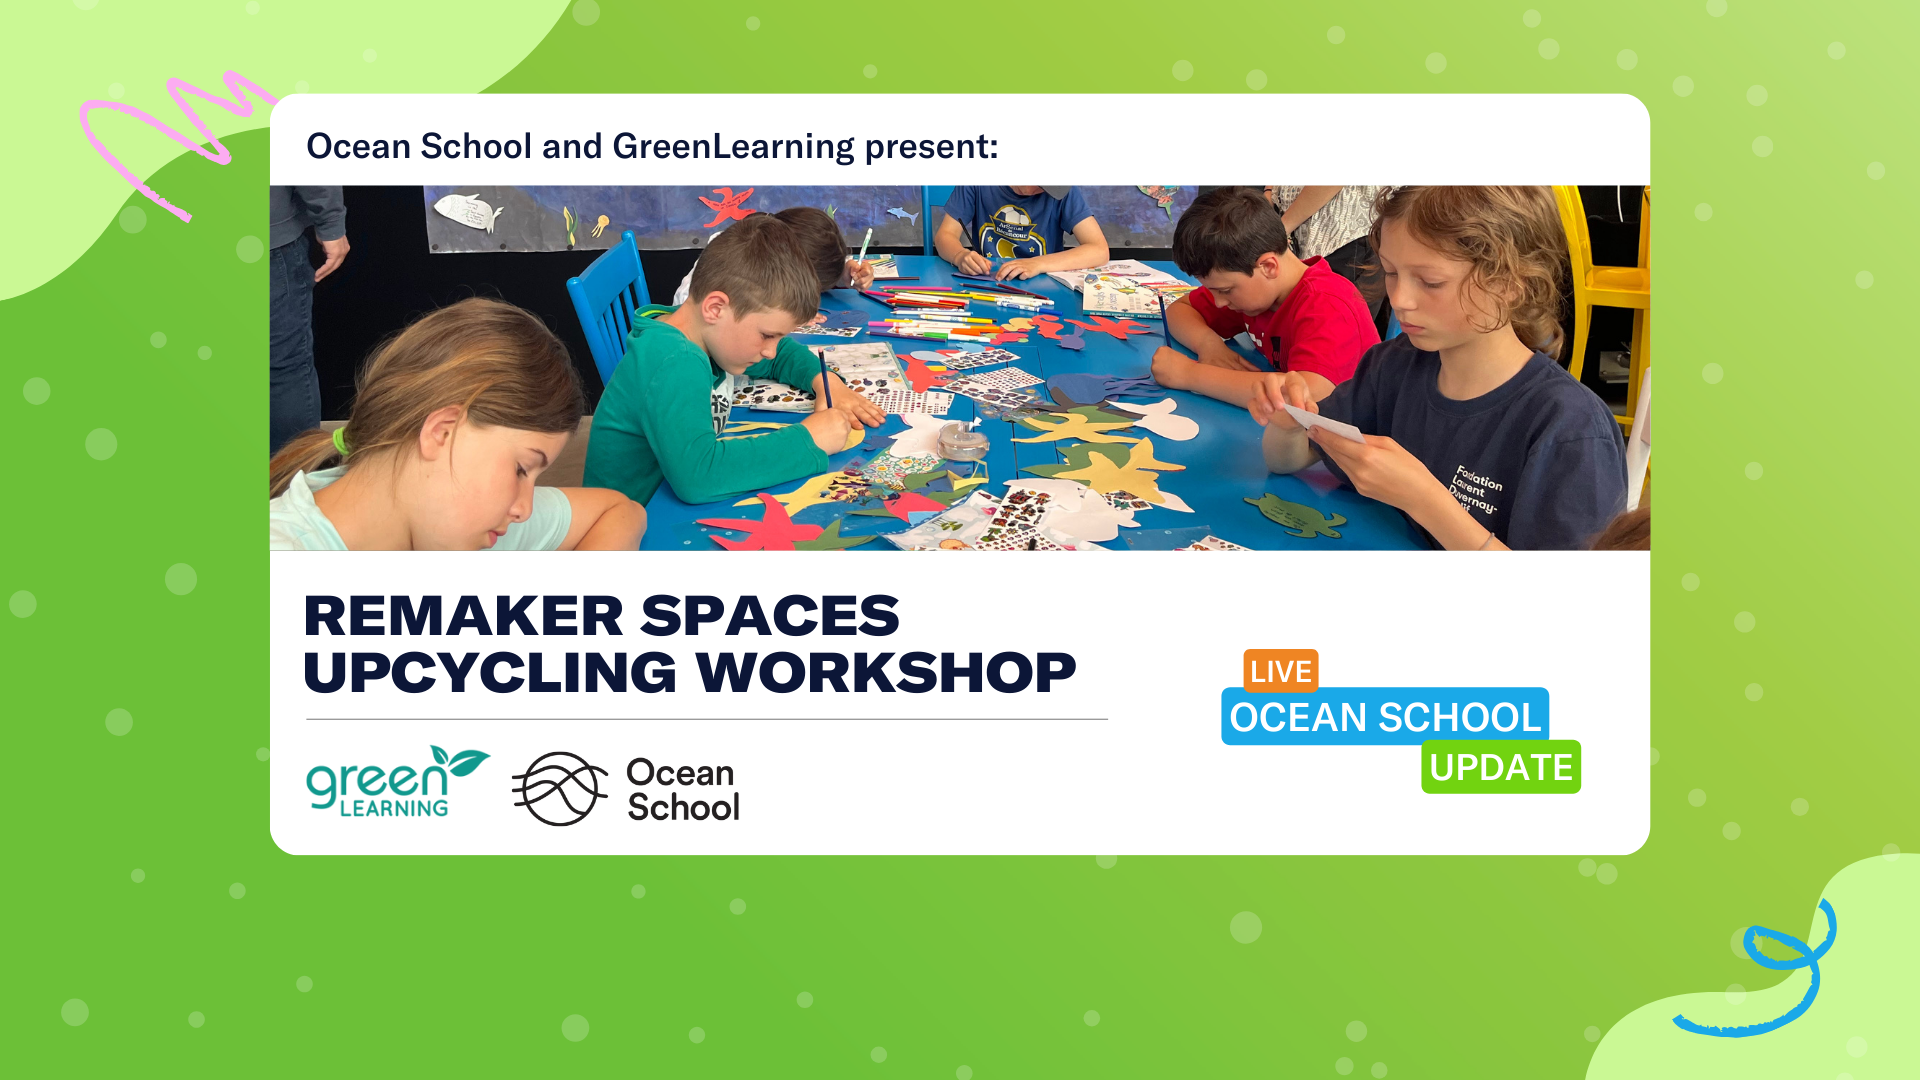 Children doing arts and crafts at a table. Text reads: “Ocean School and GreenLearning present: Remaker Spaces Upcycling Workshop.” Logos for Ocean School and GreenLearning are in the background.